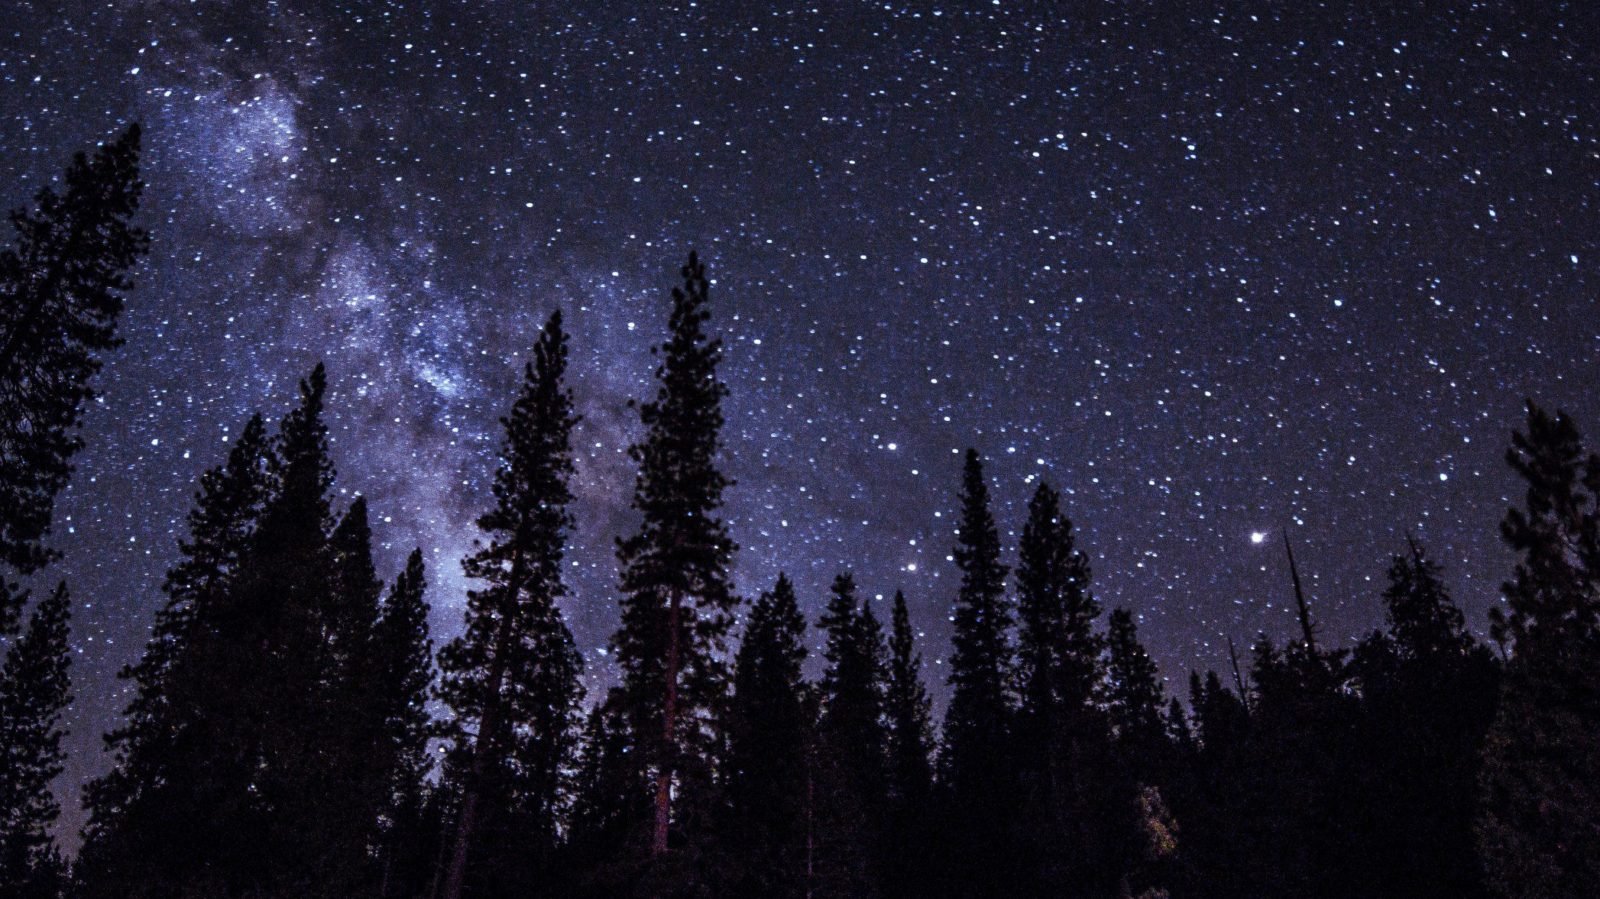 Night sky at a national park campground with many stars and the outline of evergreens against the night sky